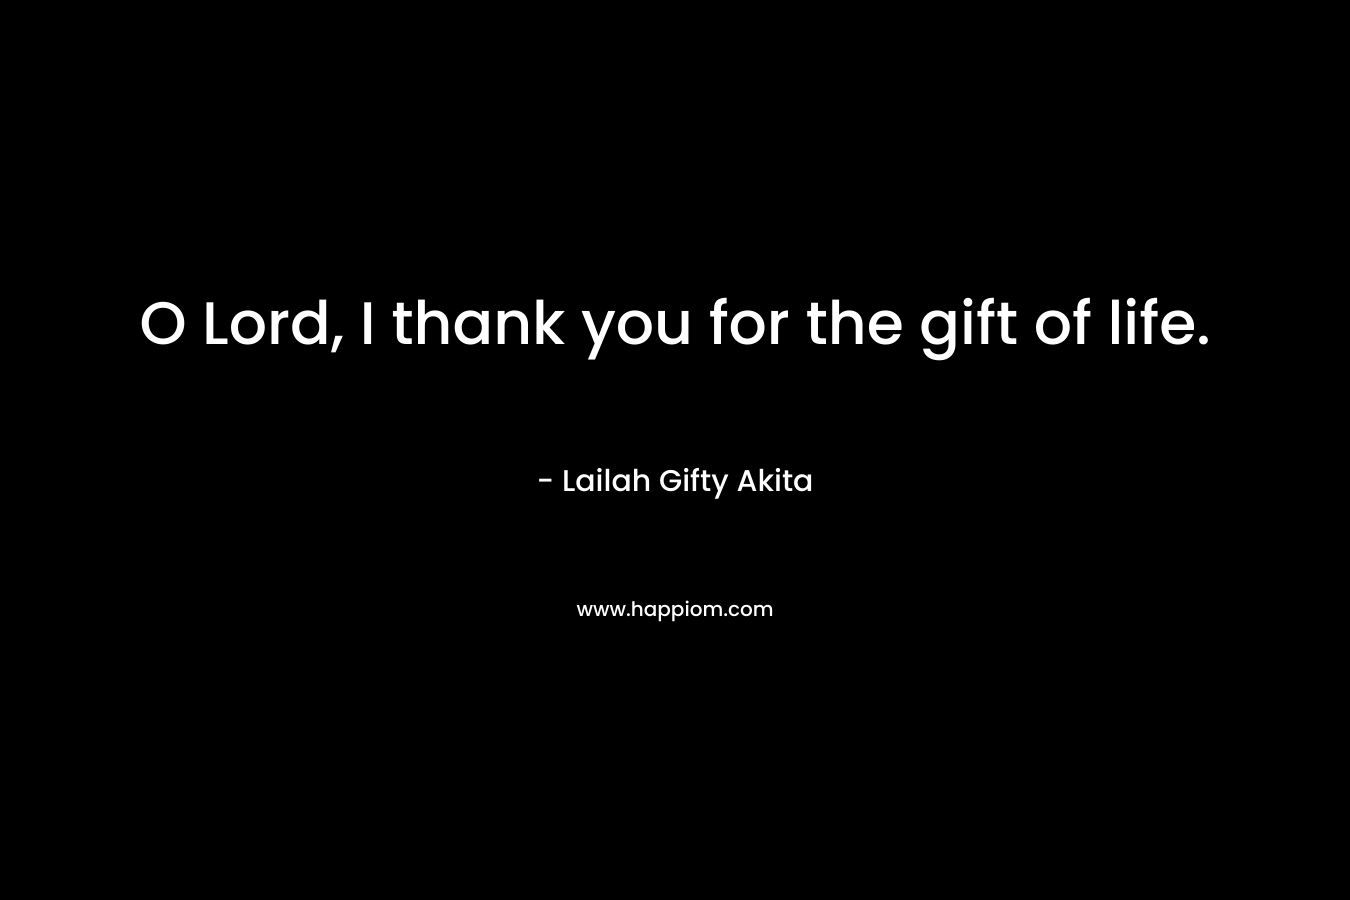 O Lord, I thank you for the gift of life.